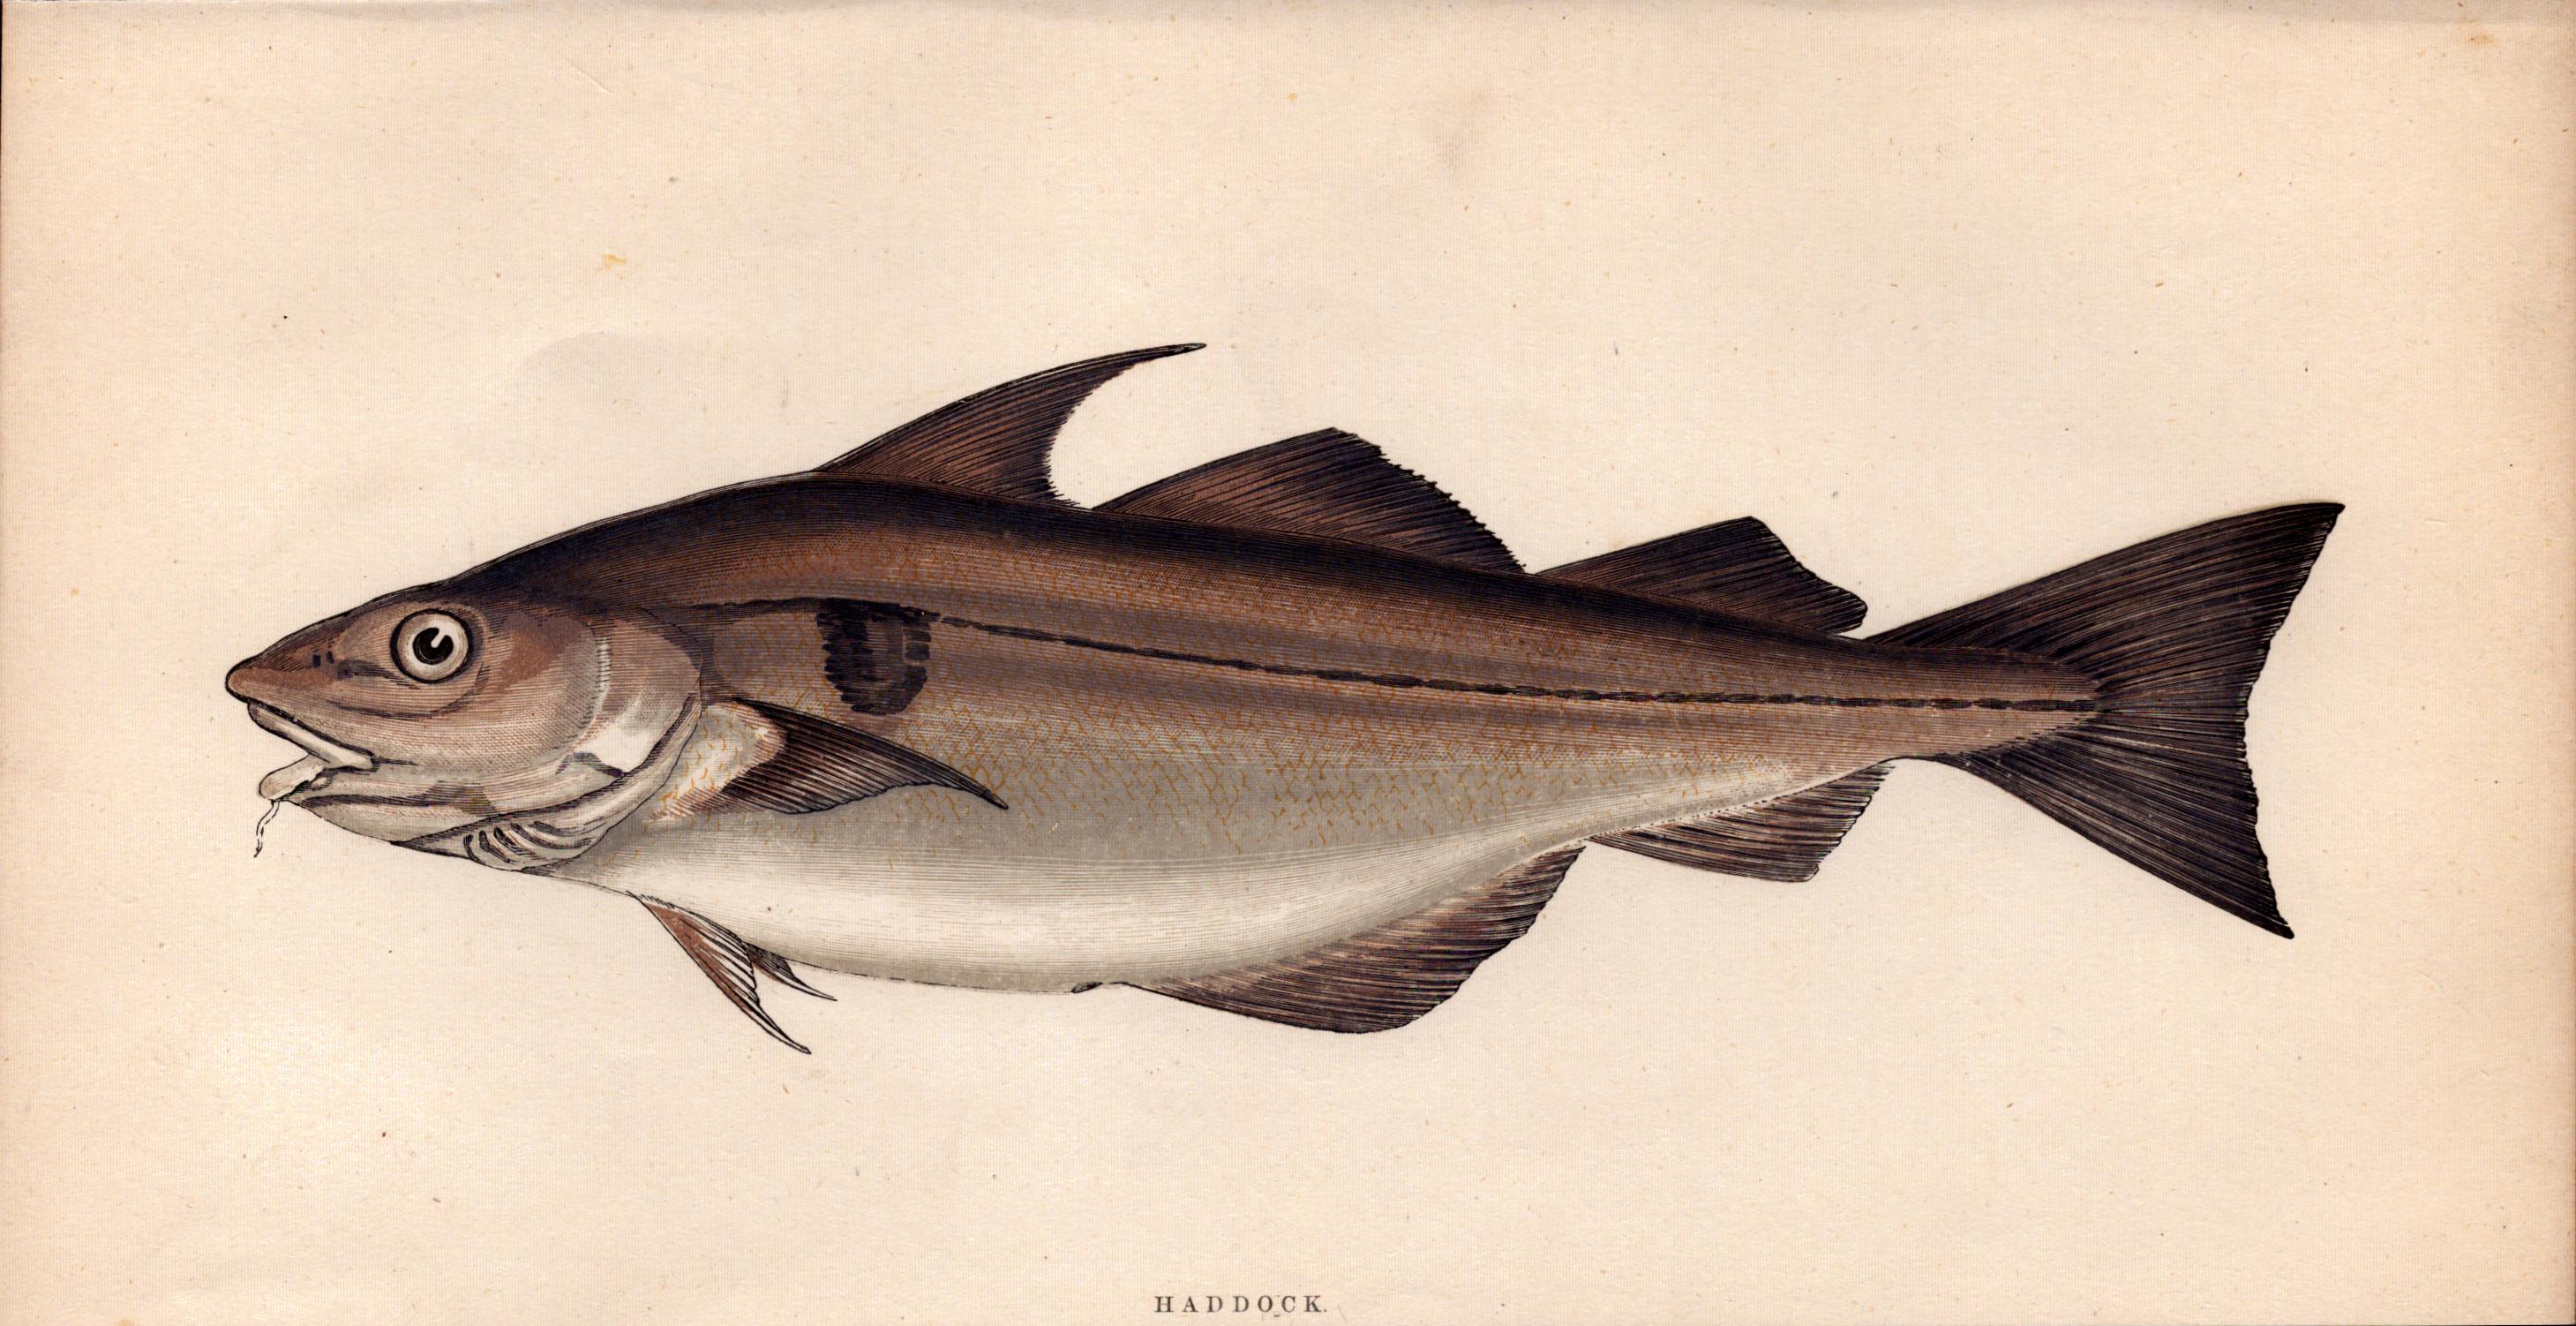 Haddock Antique Johnathan Couch Coloured 1868 Fish Engraving.